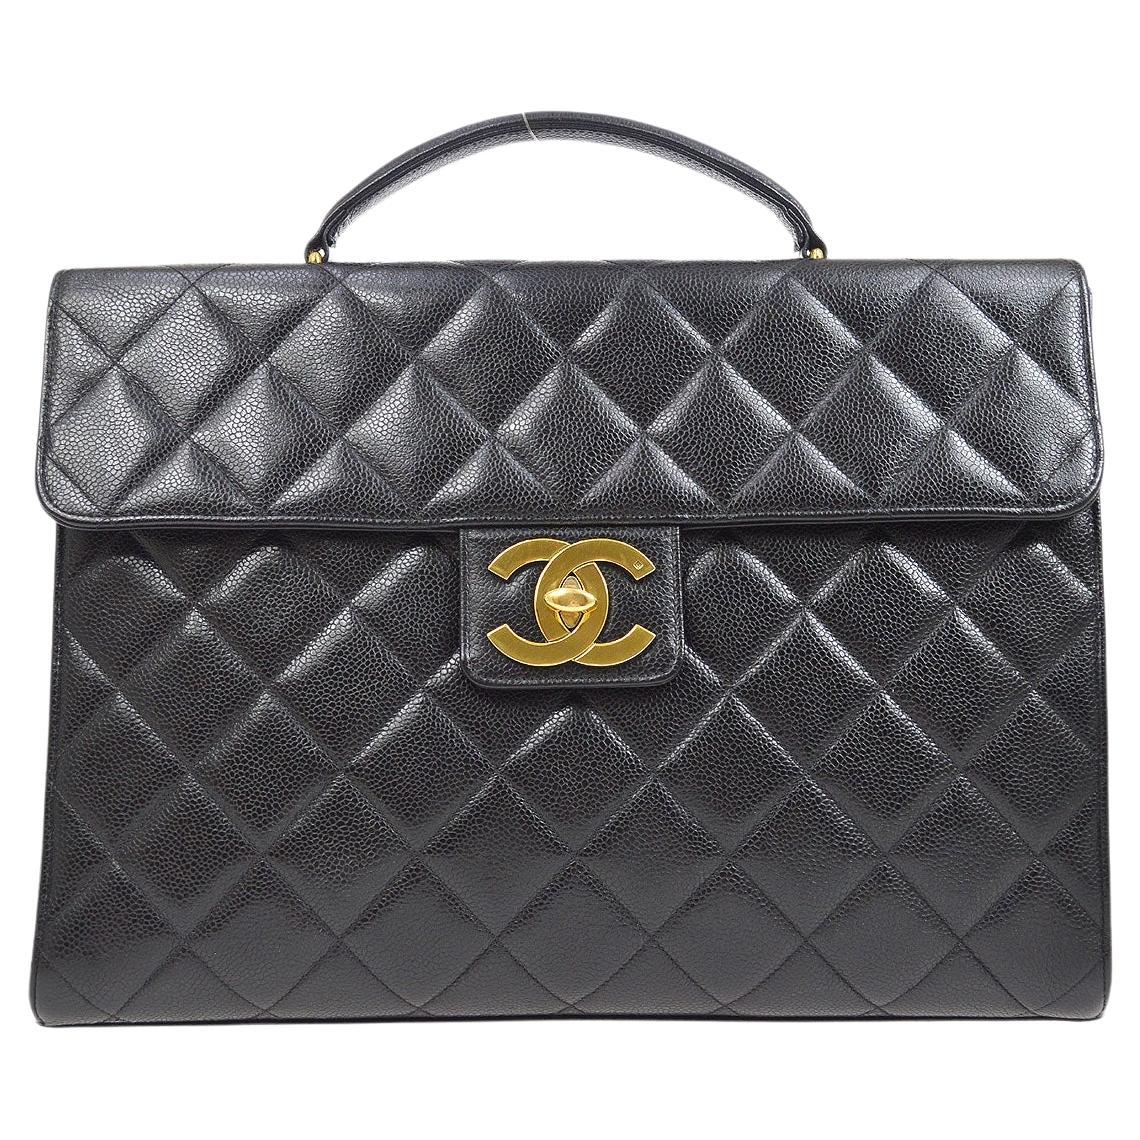 CHANEL Black Caviar Leather Gold CC Briefcase Travel Business Bag For Sale